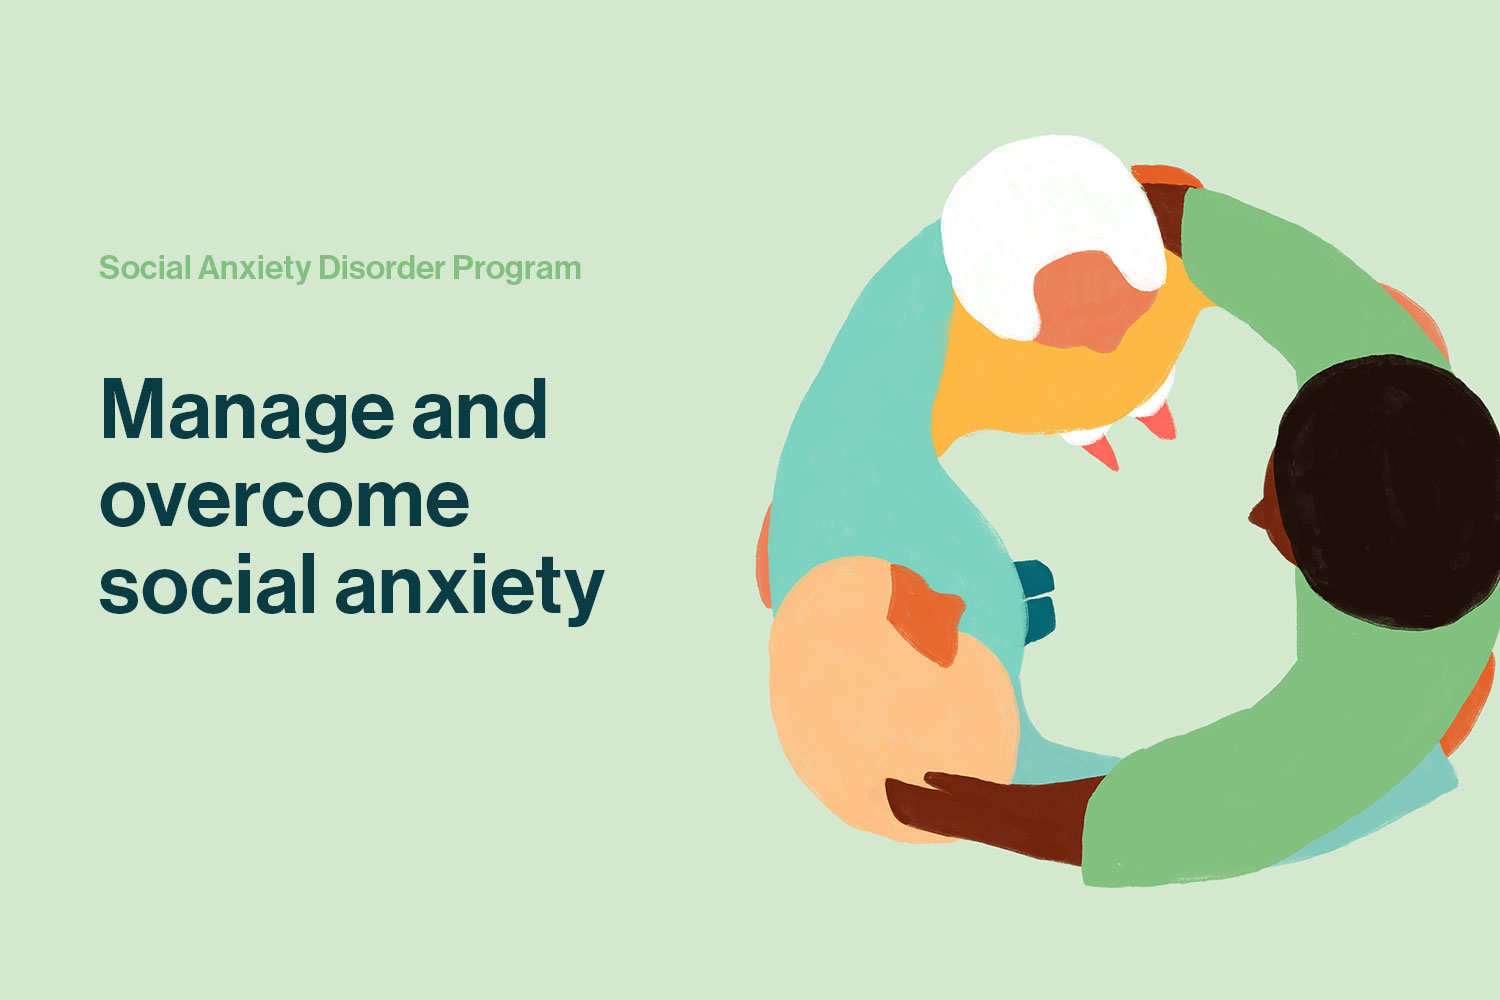 Hero illustration for Mental Health Online's Social Anxiety Disorder program with the headline "Manage and overcome social anxiety".